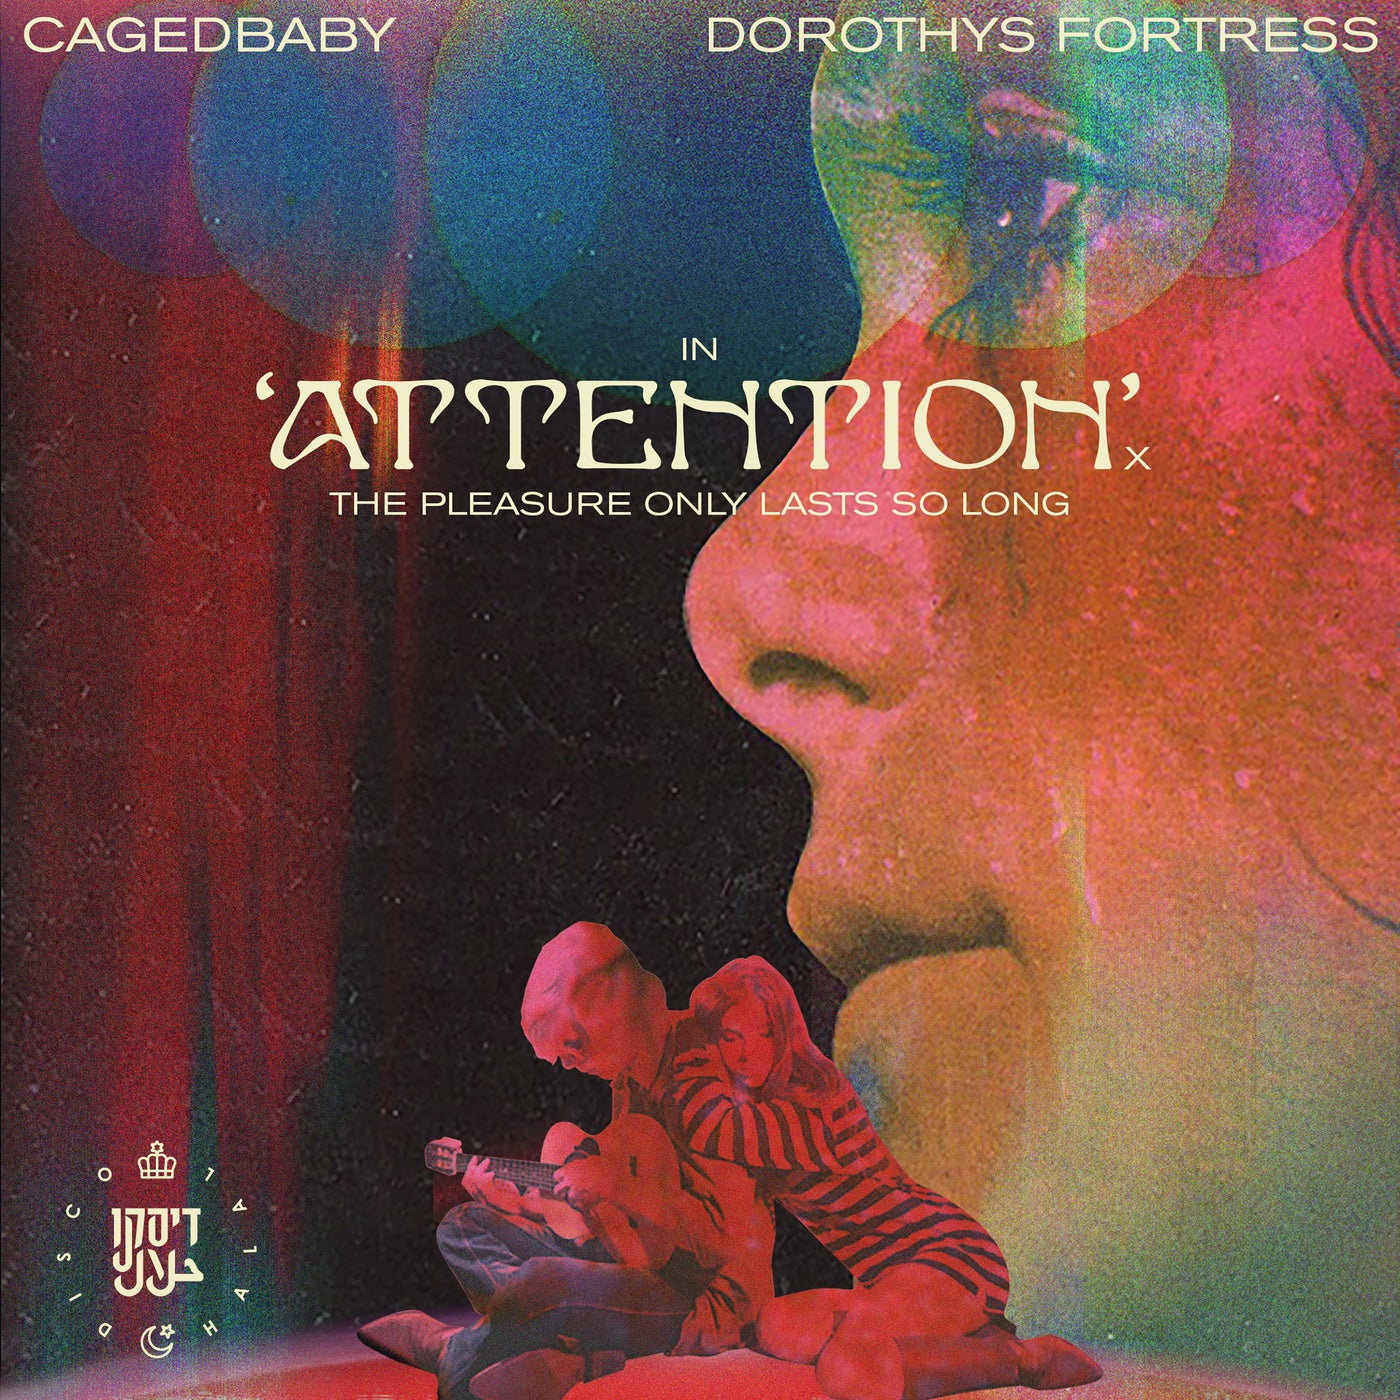 Cagedbaby & Dorothys Fortress - Attention [190296489518]